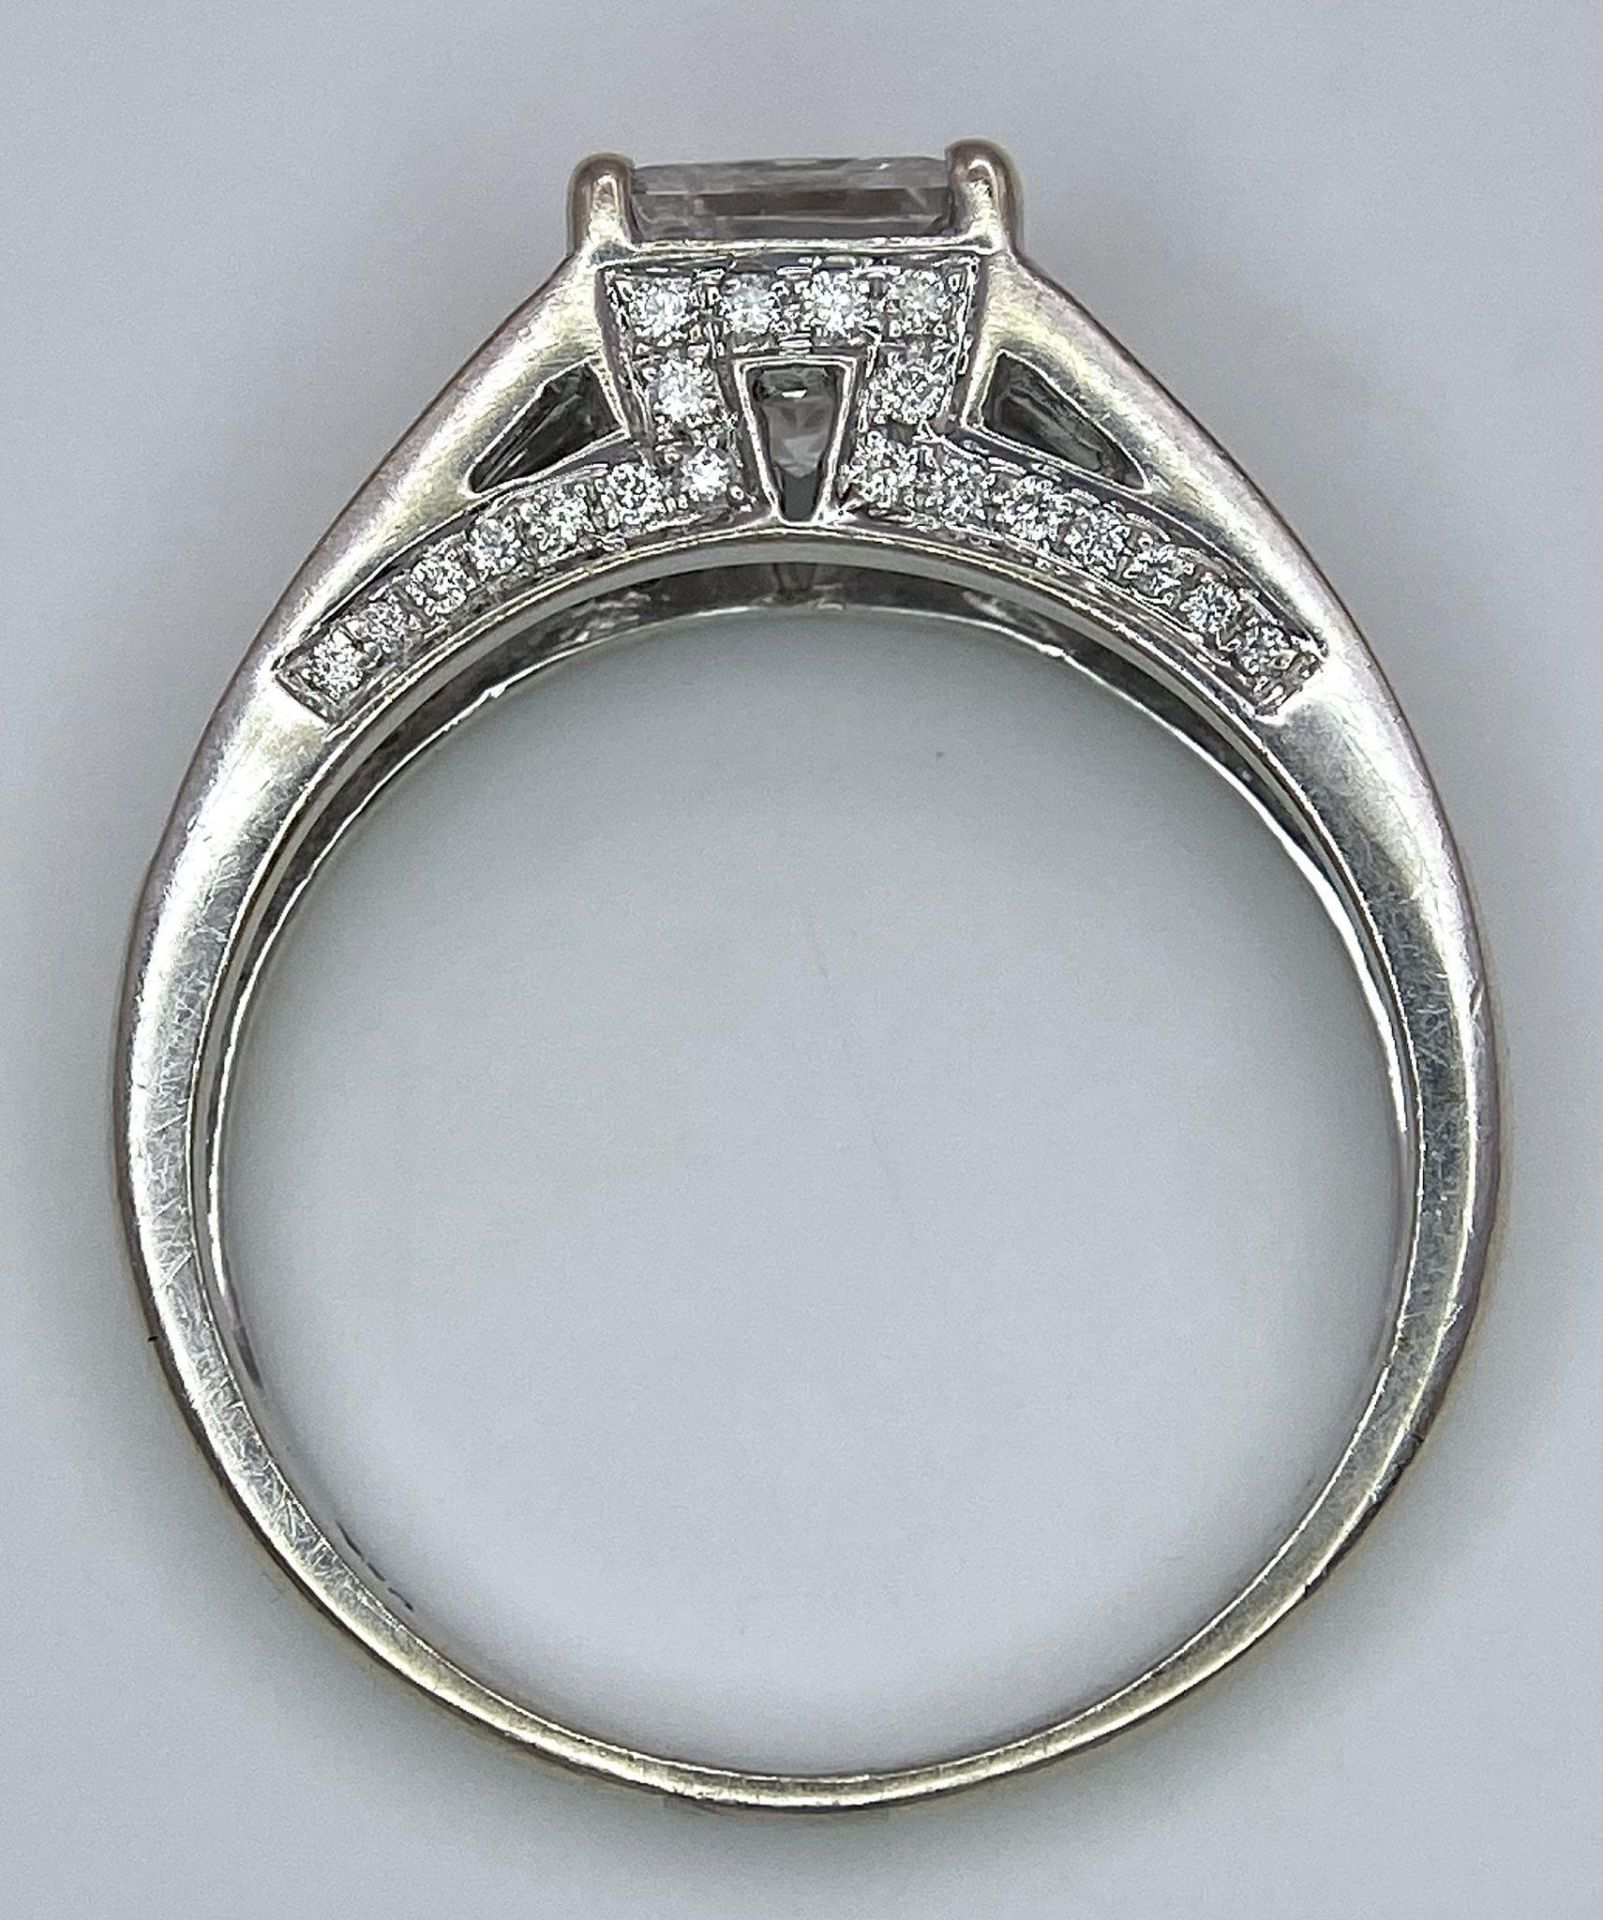 An 18K White Gold Diamond Ring. Central VS2 1ct Princess Cut Near White Diamond with Round Cut - Image 8 of 10